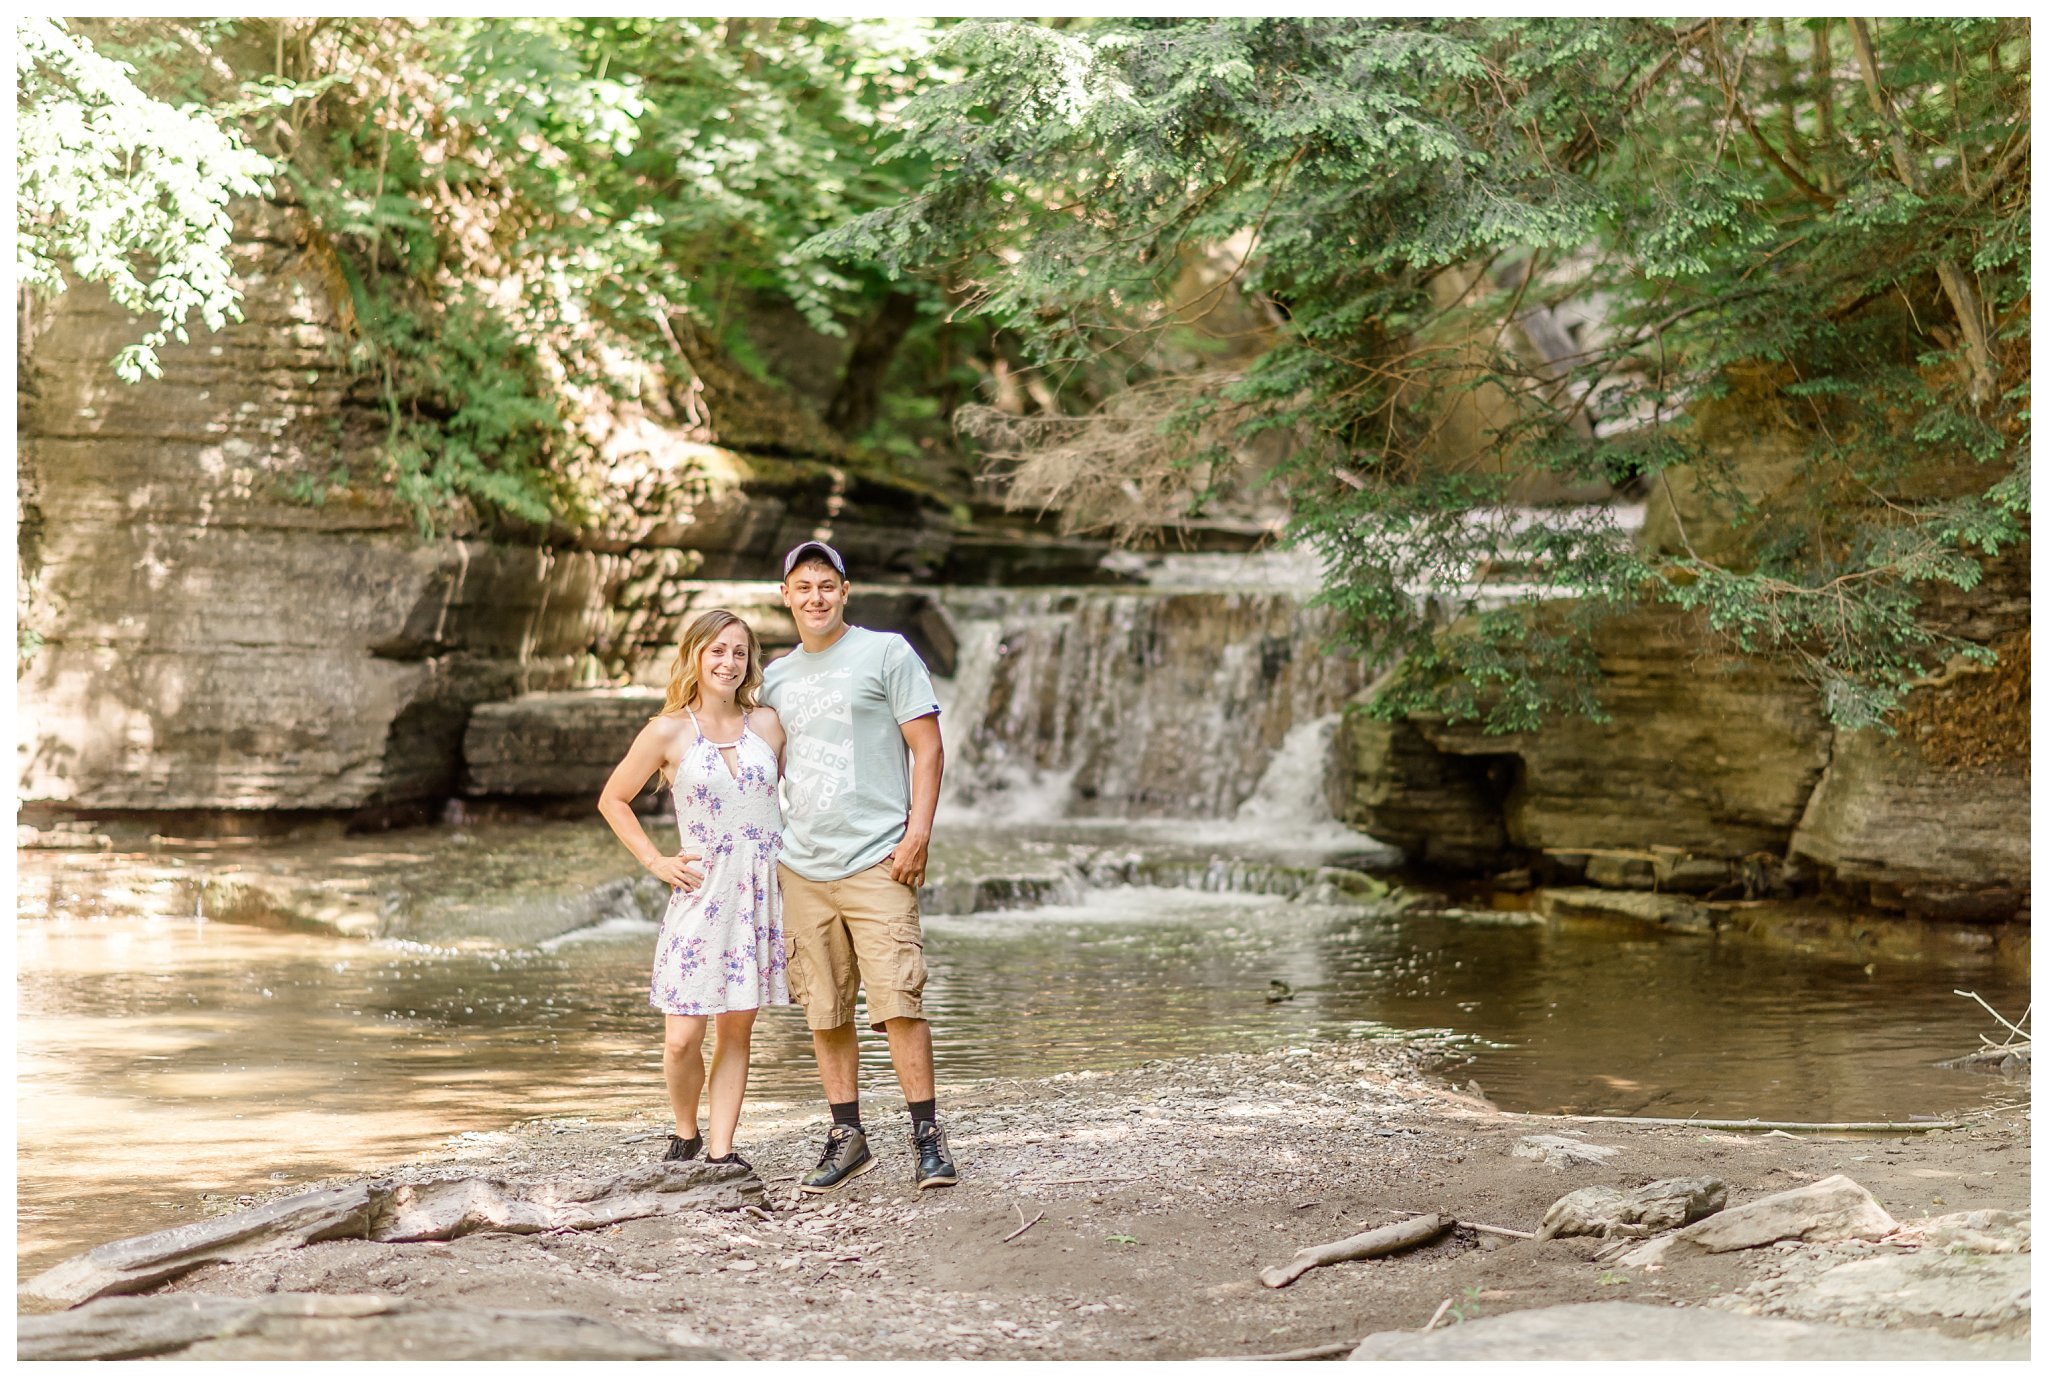 Joanna Young Photography Elizabeth and Cody Engagement Session_0017.jpg